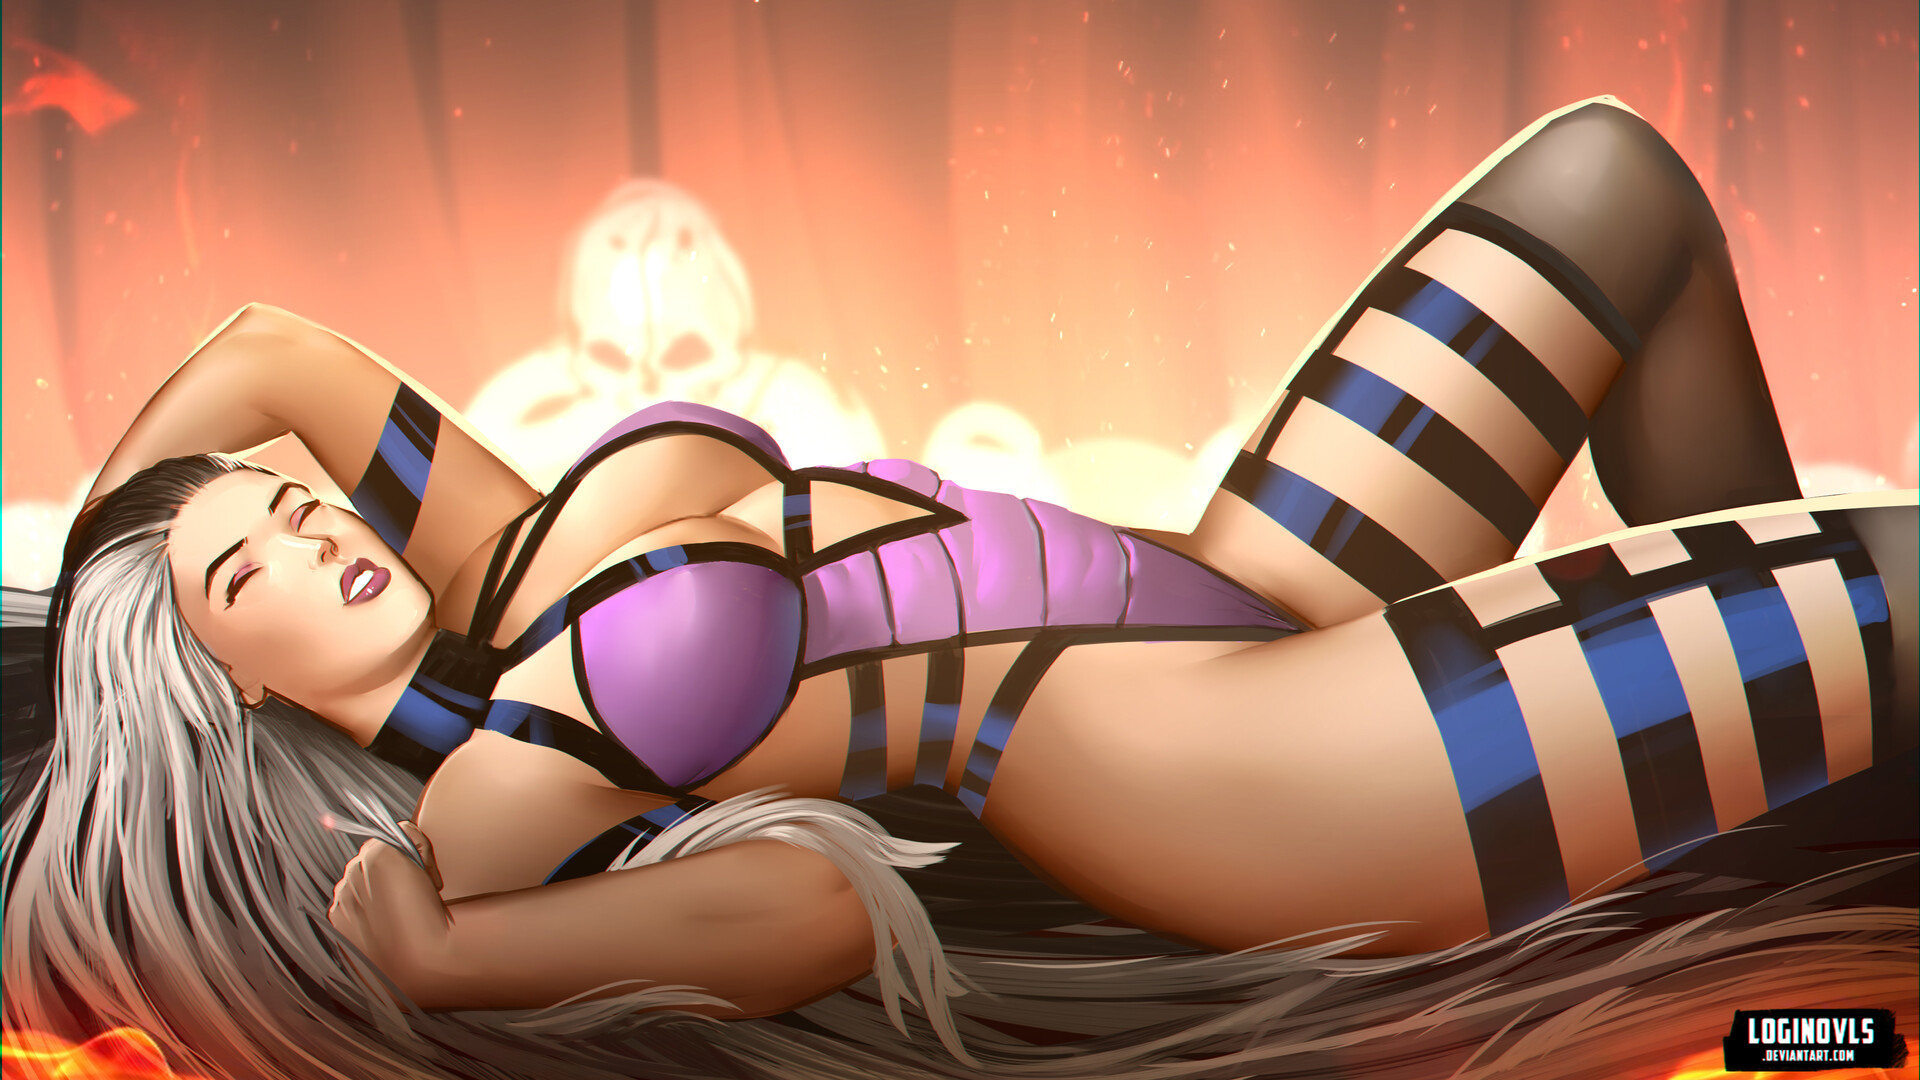 Mortal kombat sindel sexy ✔ Rule34 - If it exists, there is 